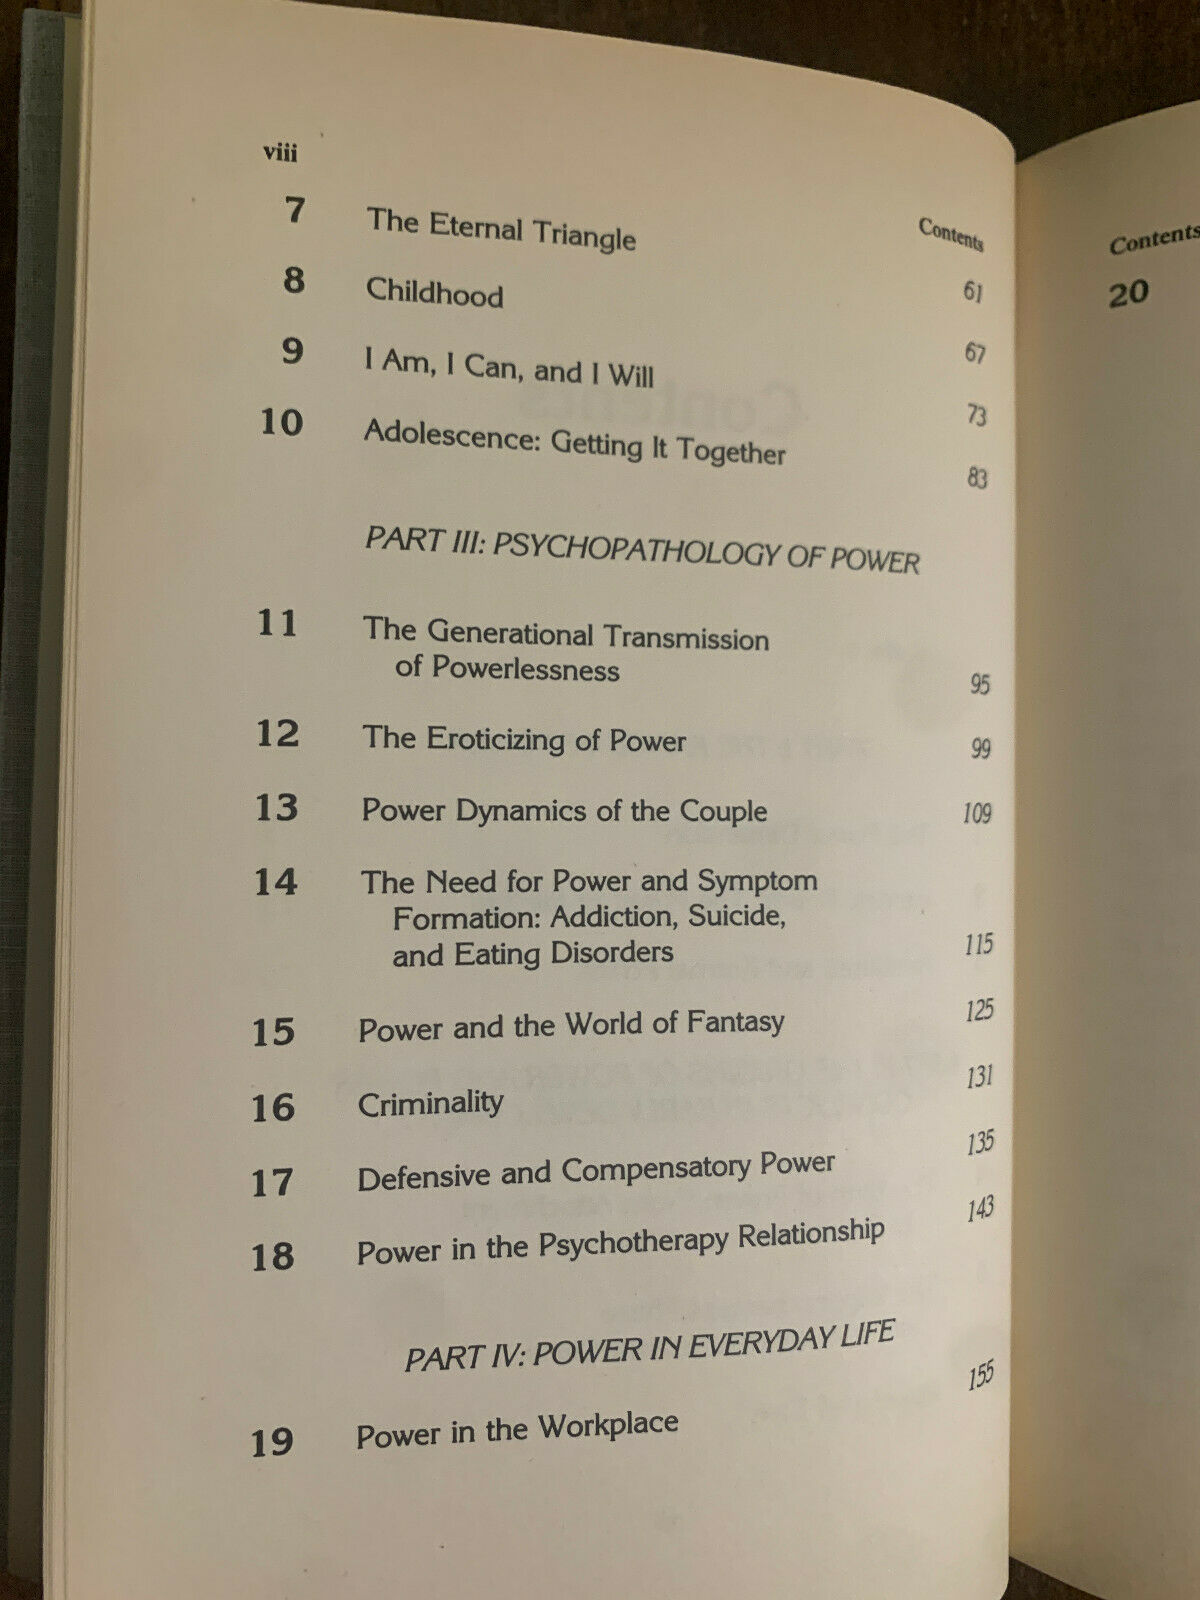 The Wish for Power and the Fear of Having It by Althea J. Horner 1988 (Z1)